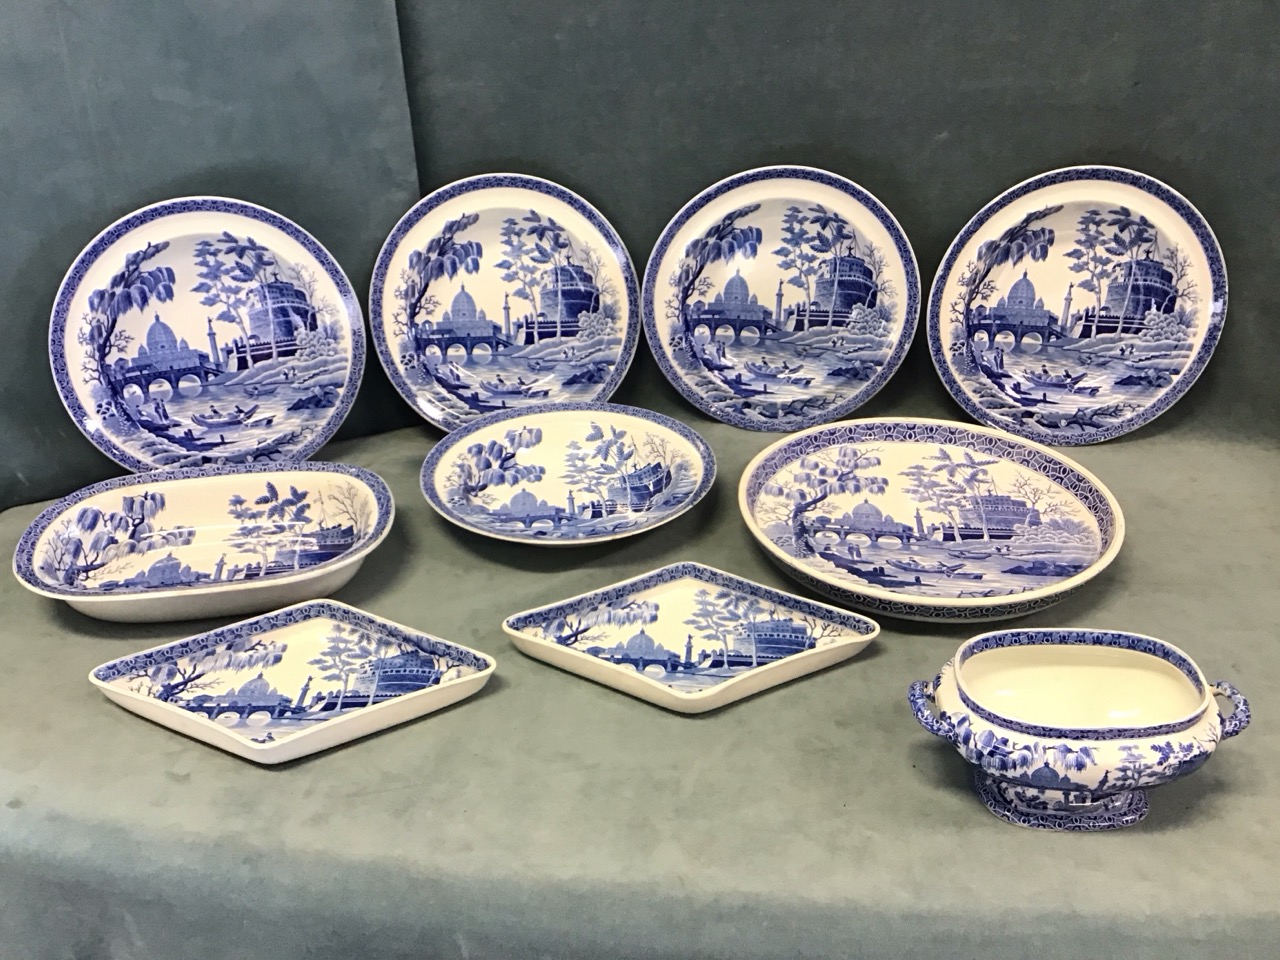 A collection of regency period Spode Blue Italian ceramics - a cheese plate, two lozenge shaped